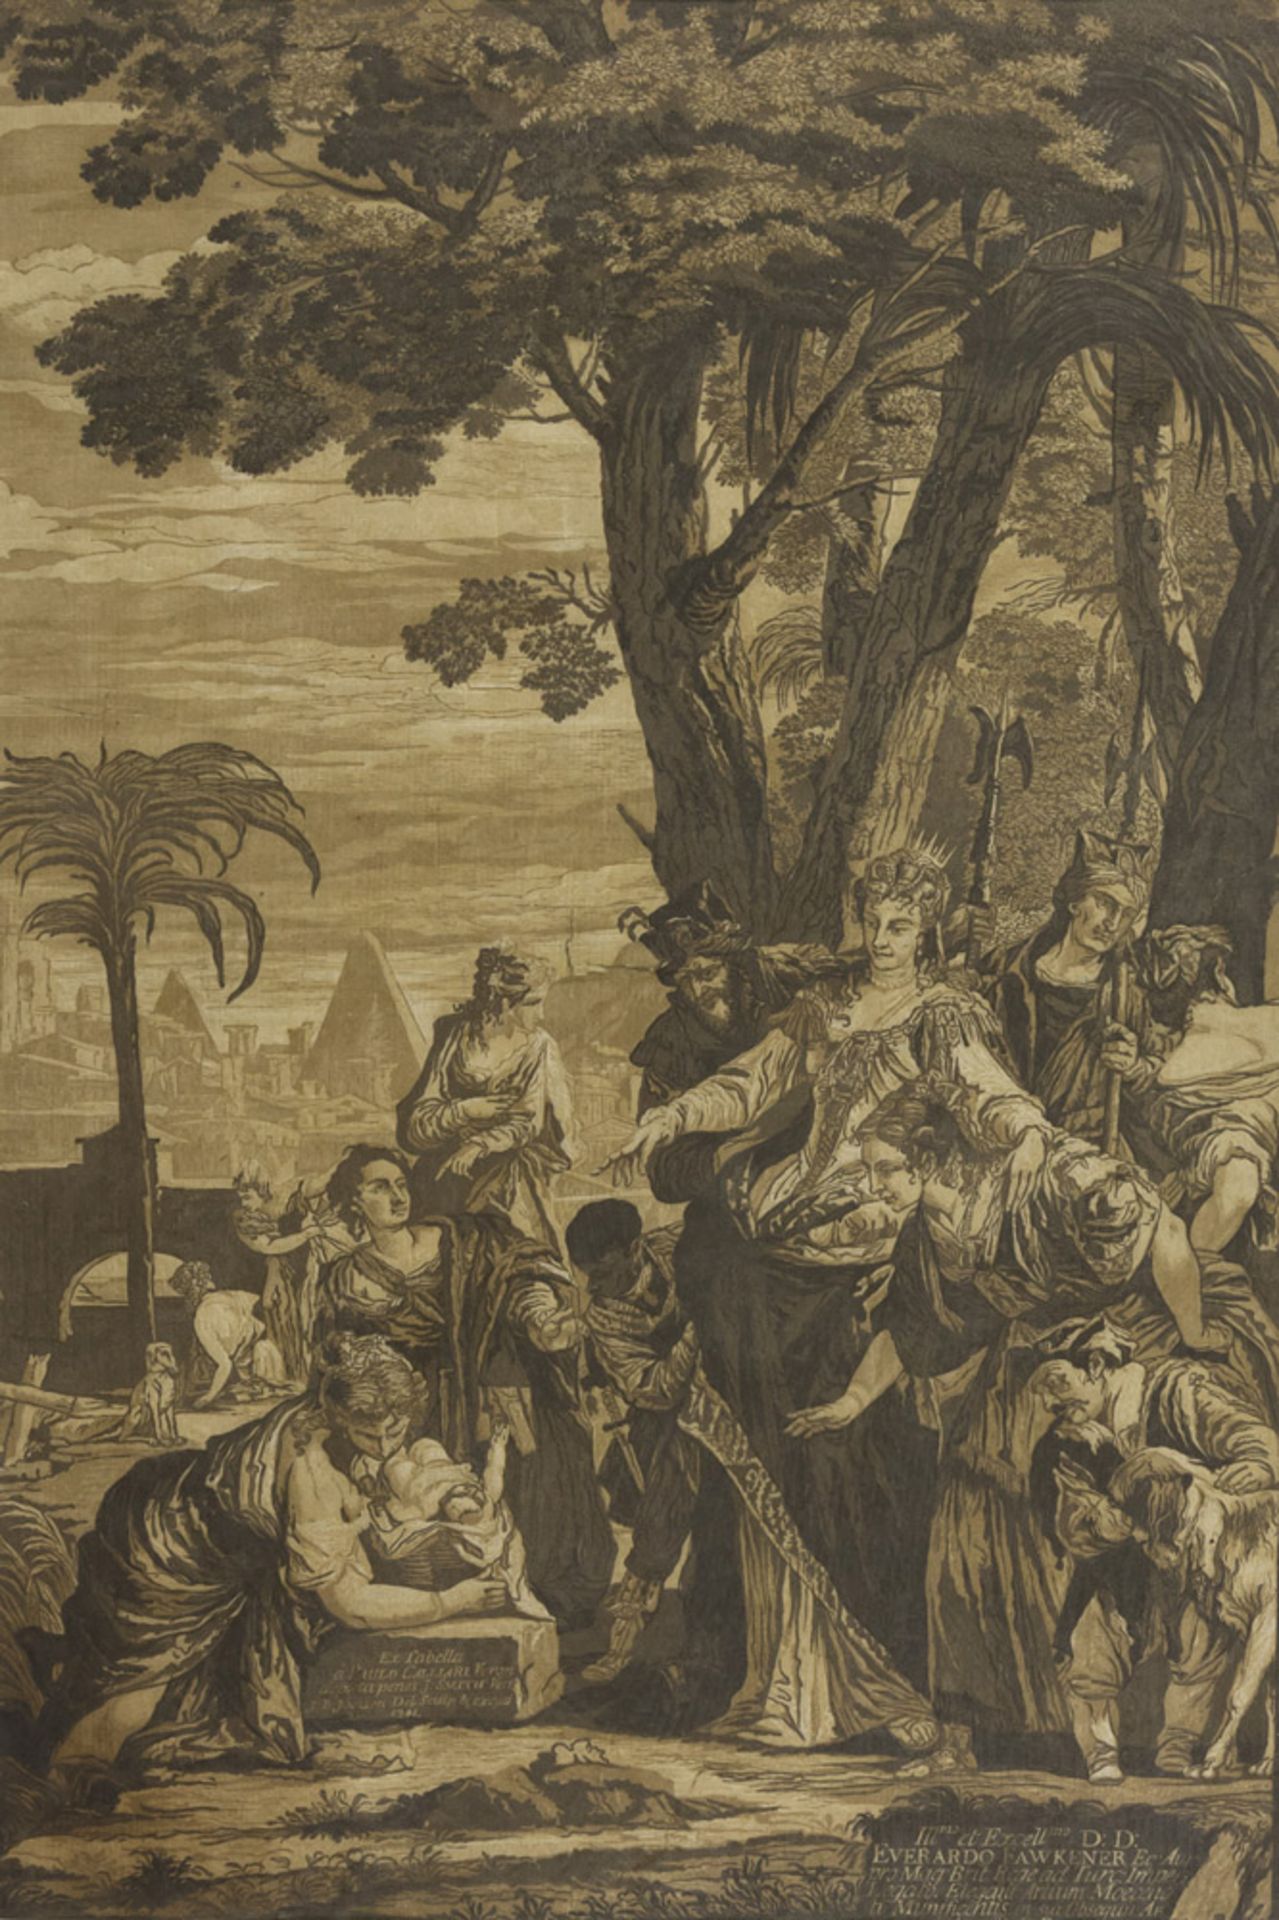 ENGLISH ENGRAVER, 18TH CENTURY RECOVERY OF MOSES, AFTER VERONESE Watercolored engraving, cm. 54 x 36